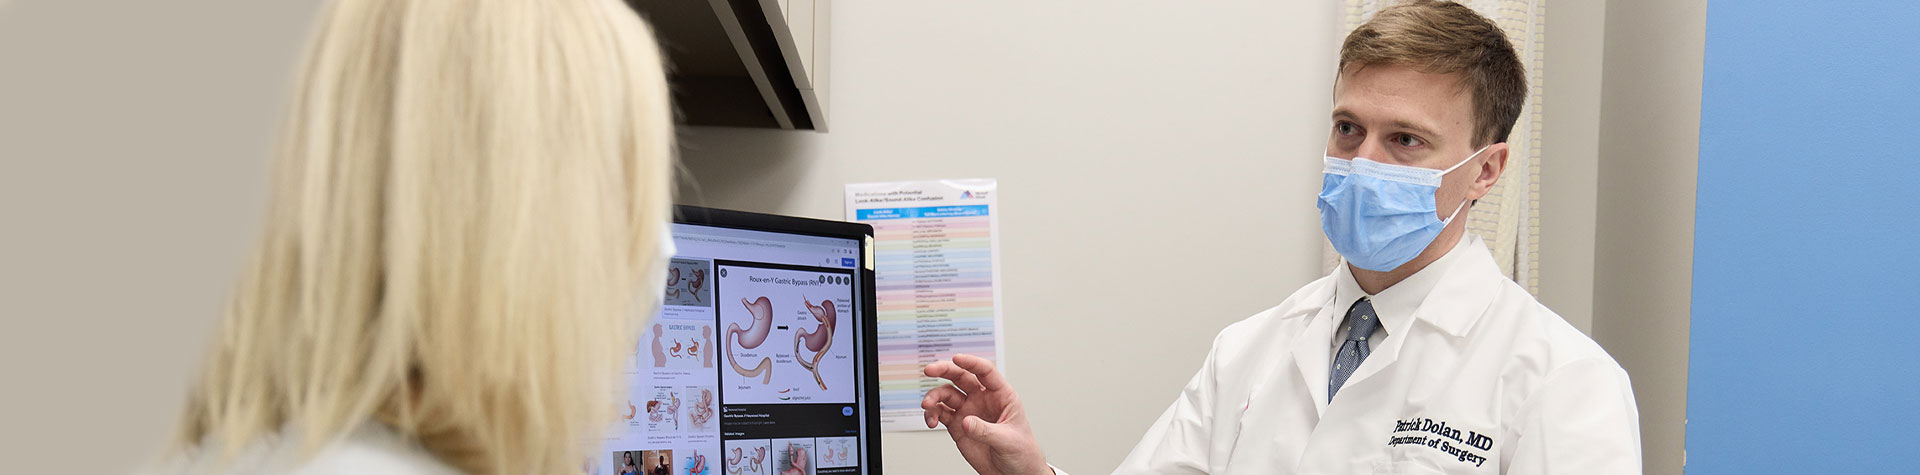 doctor showing patient an image of the stomach on a computer